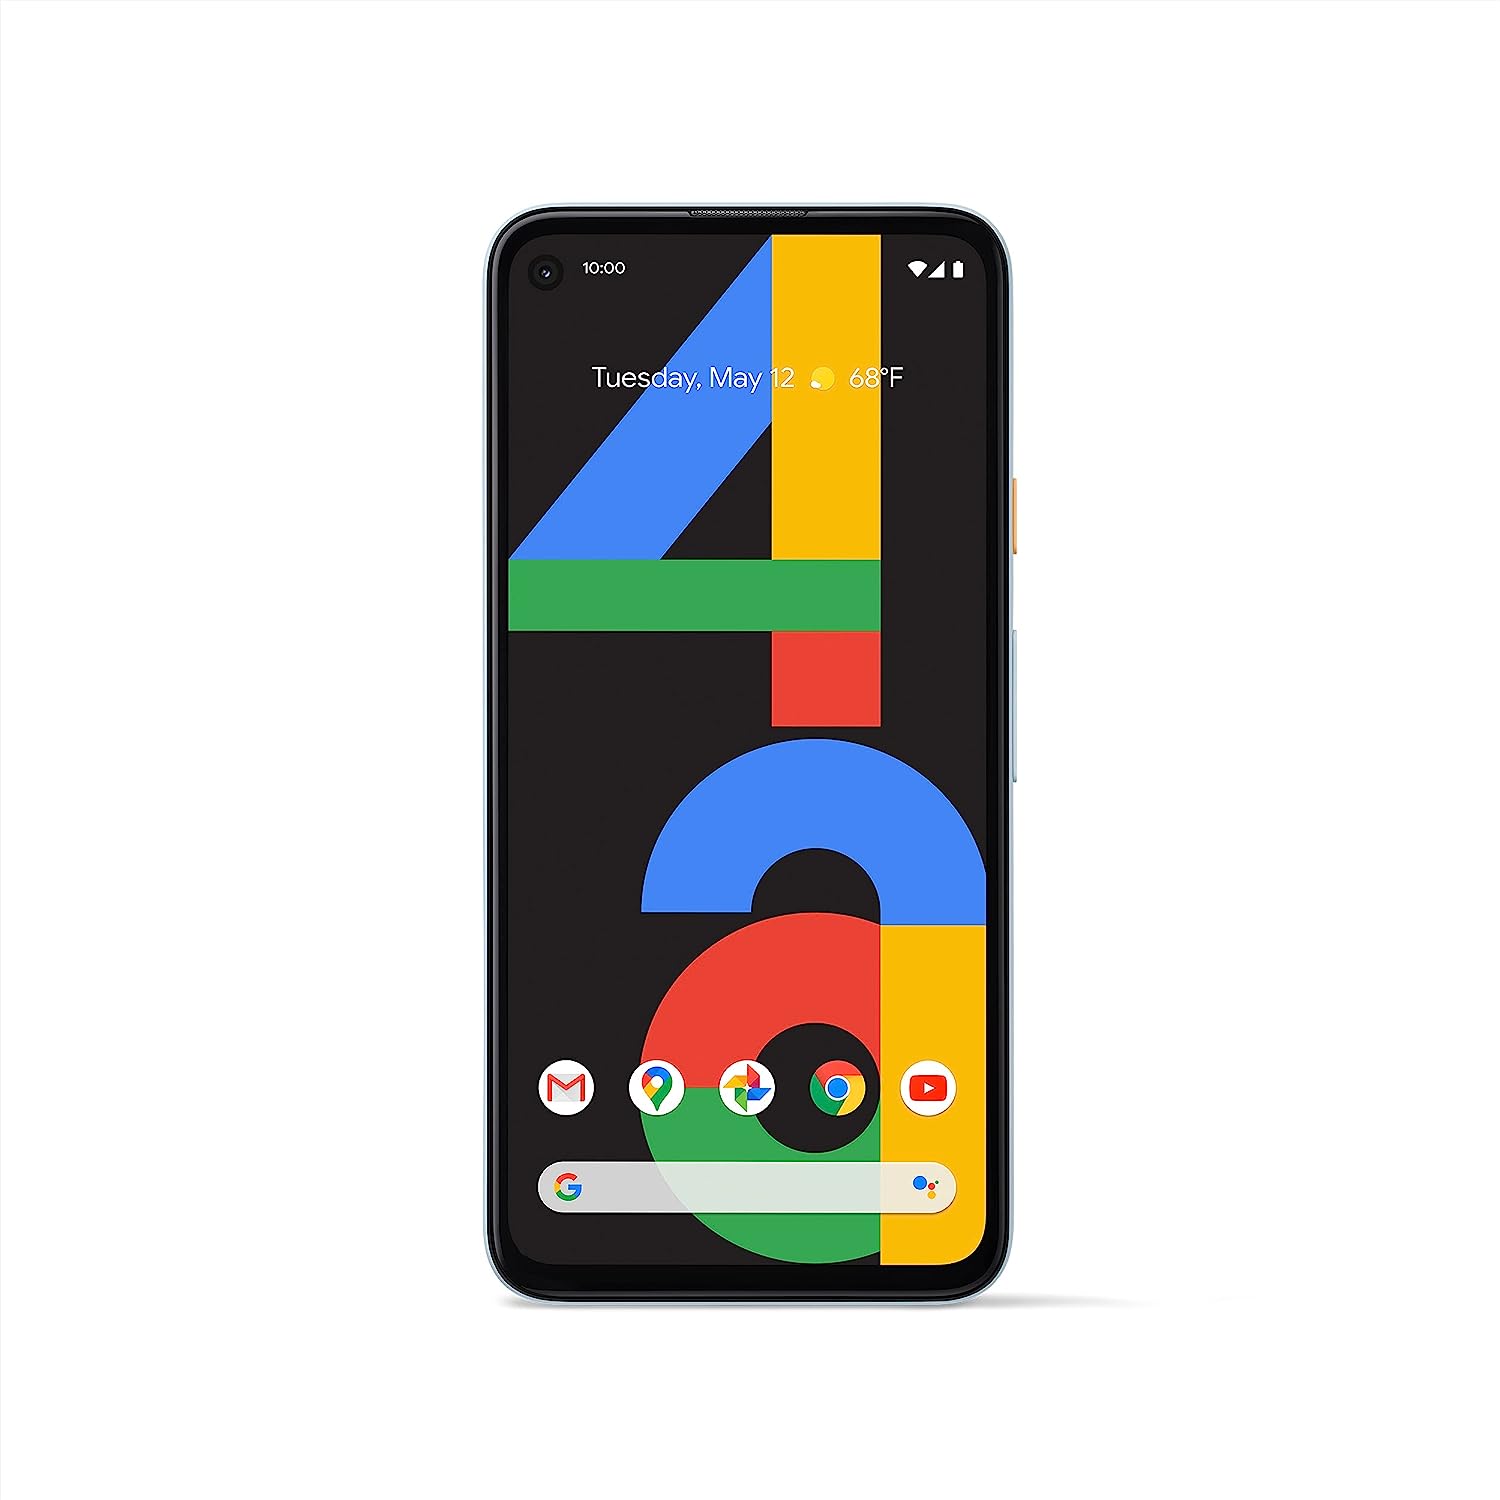 Google Pixel 4a - Unlocked Android Smartphone - 128 GB of Storage - Up to 24 Hour Battery - Just Black